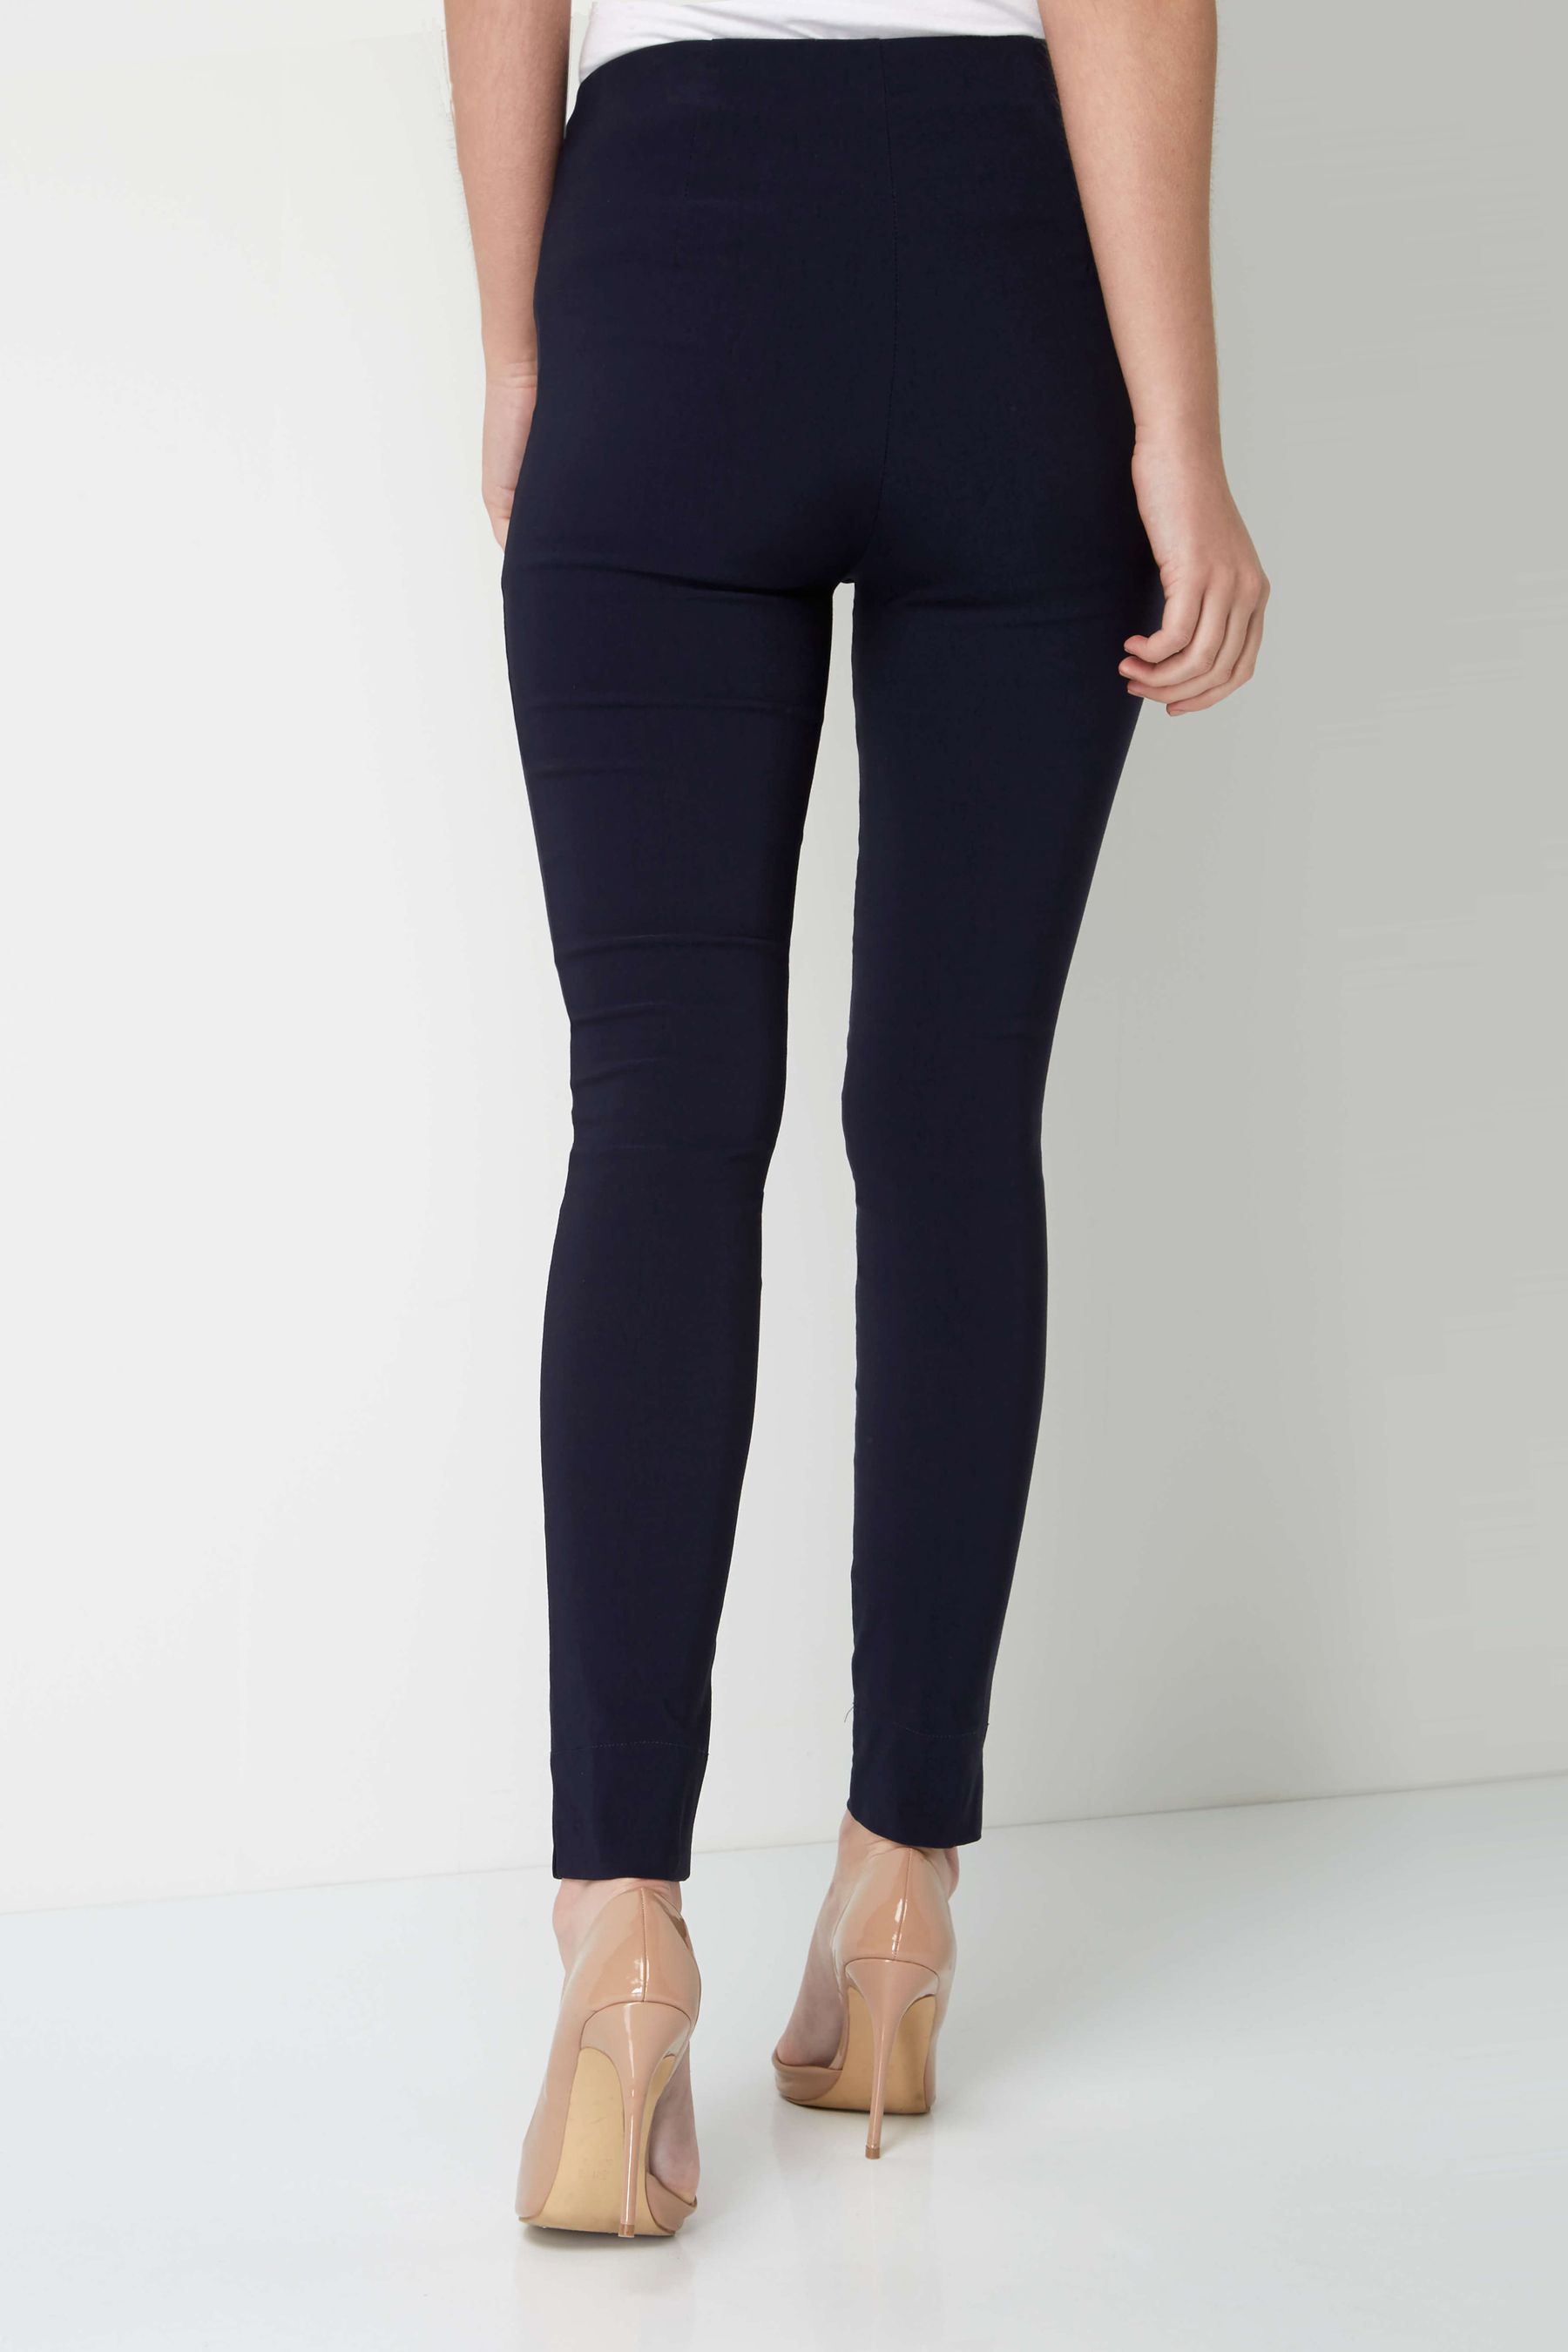 Buy Roman Navy Originals Full Length Stretch Trousers from the Next UK ...